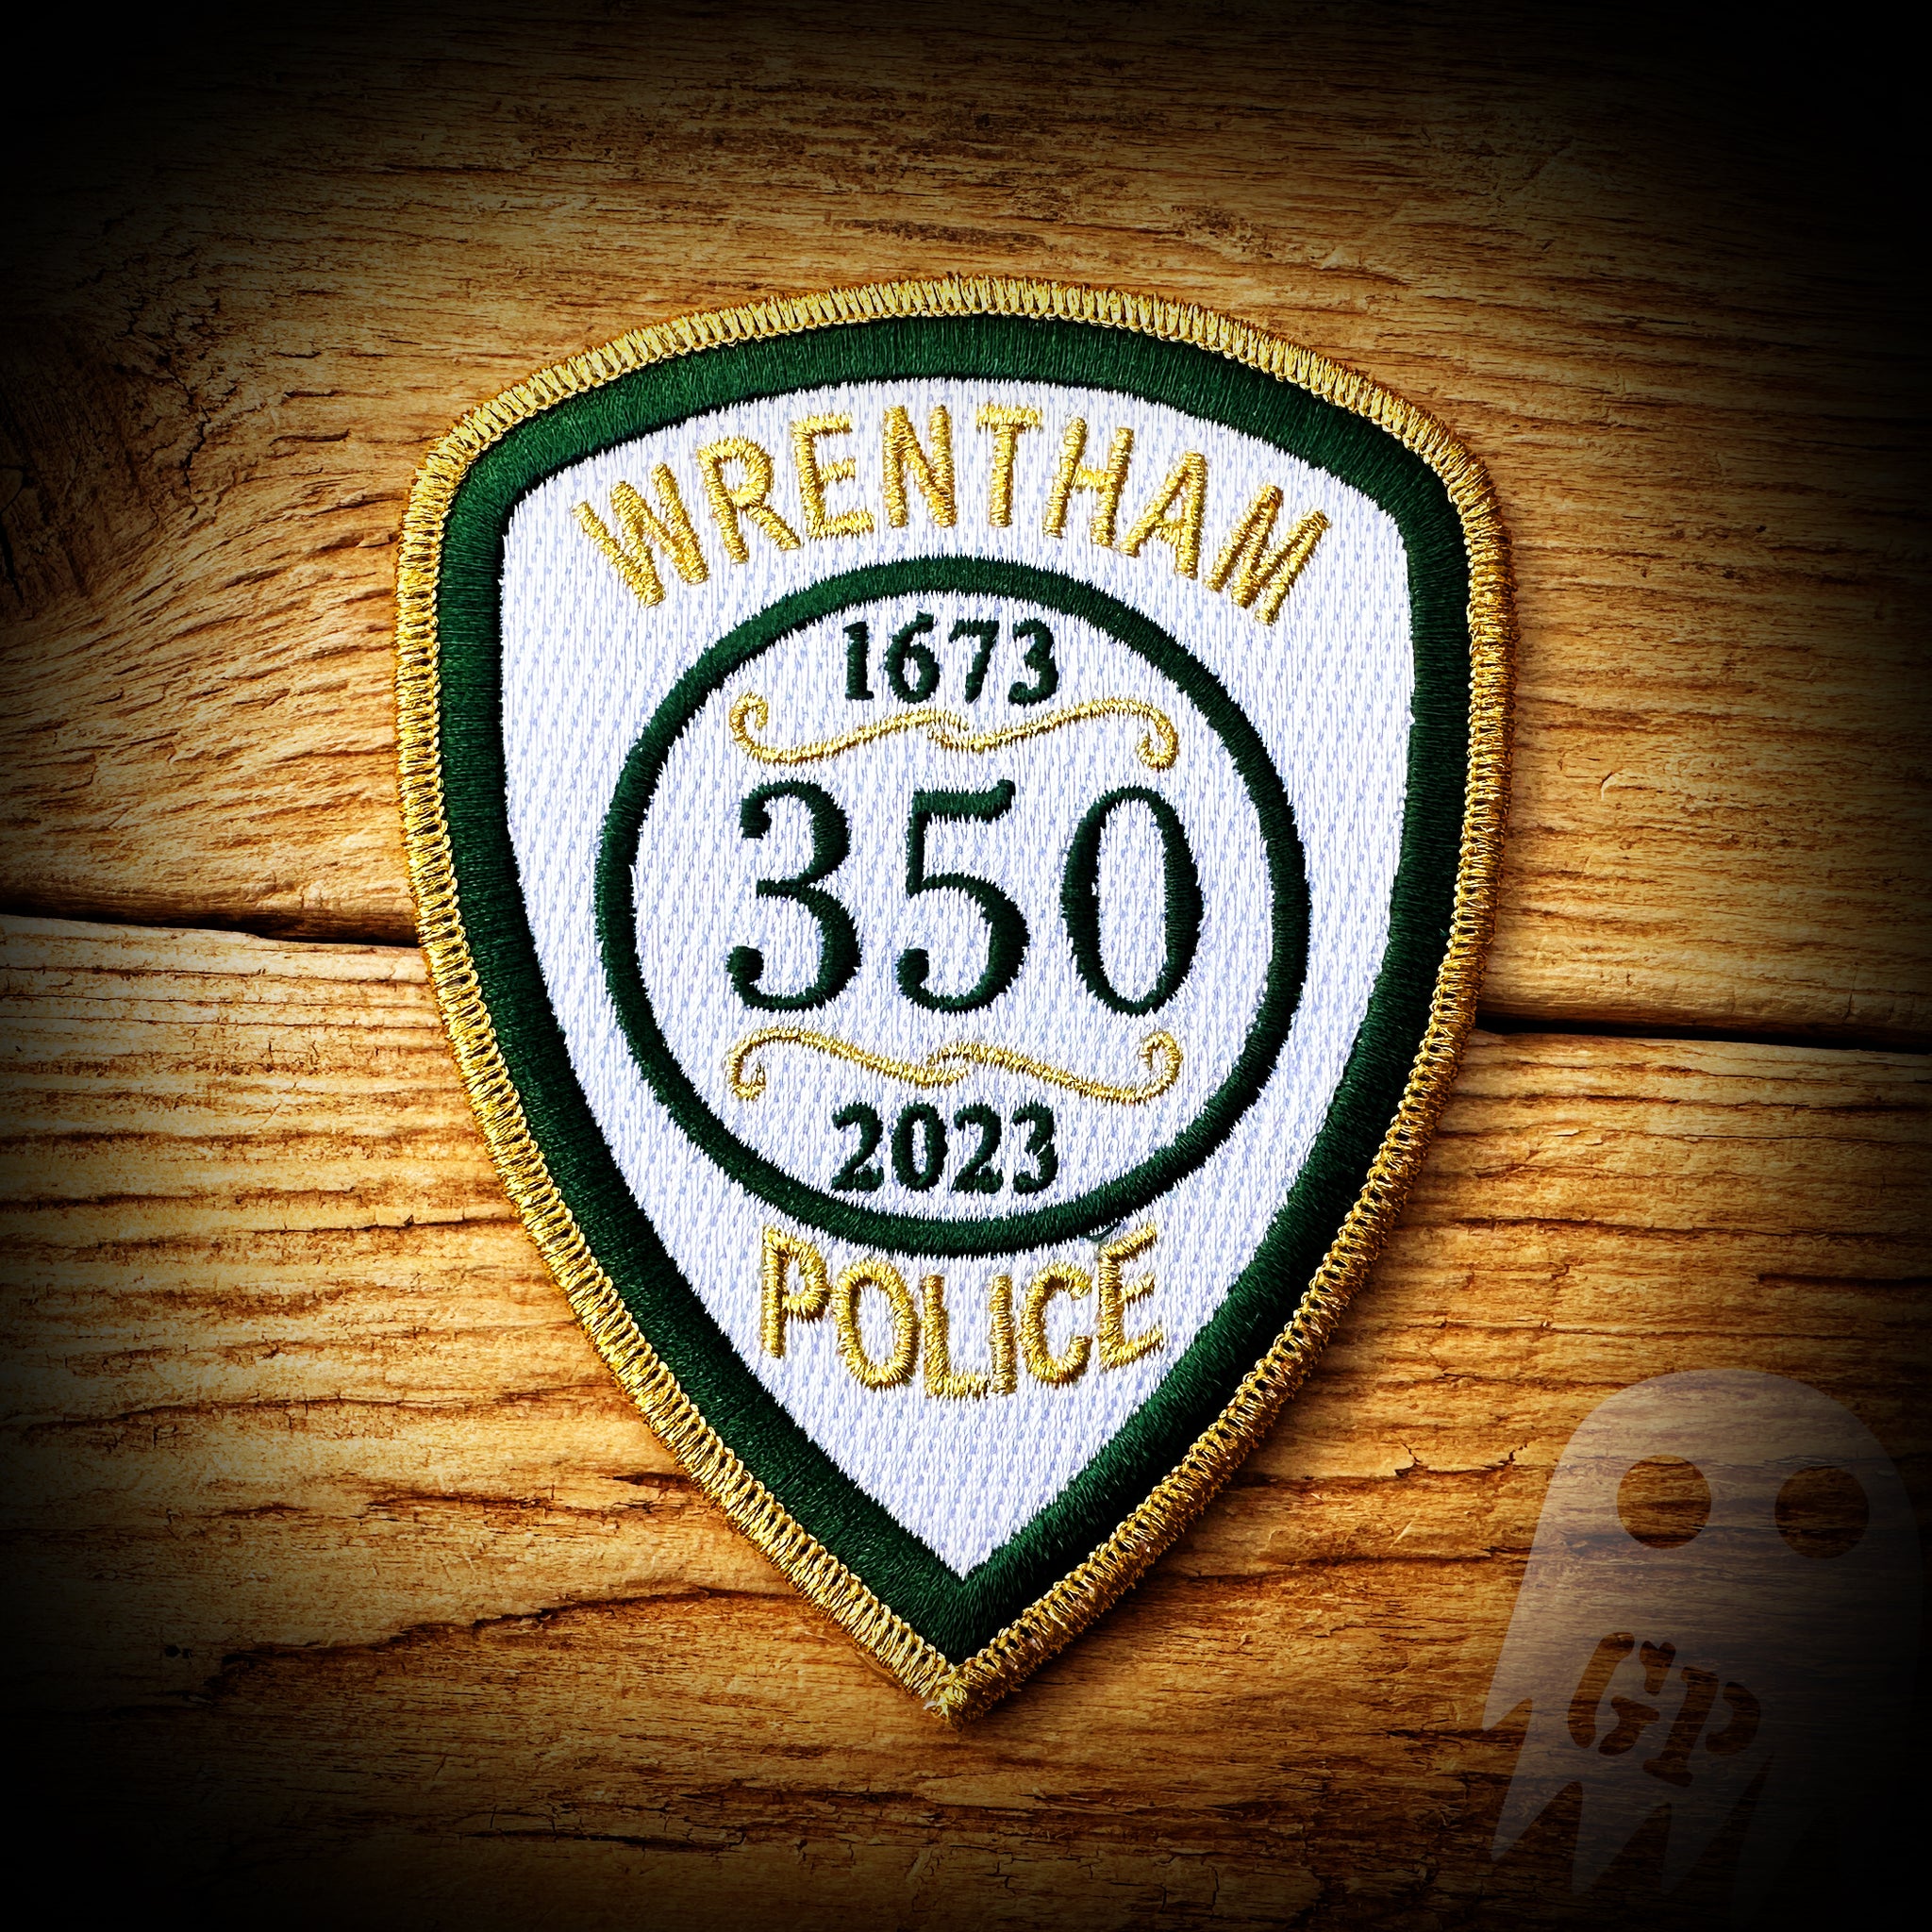 350th - Wrentham, MA PD 350th anniversary patch - authentic